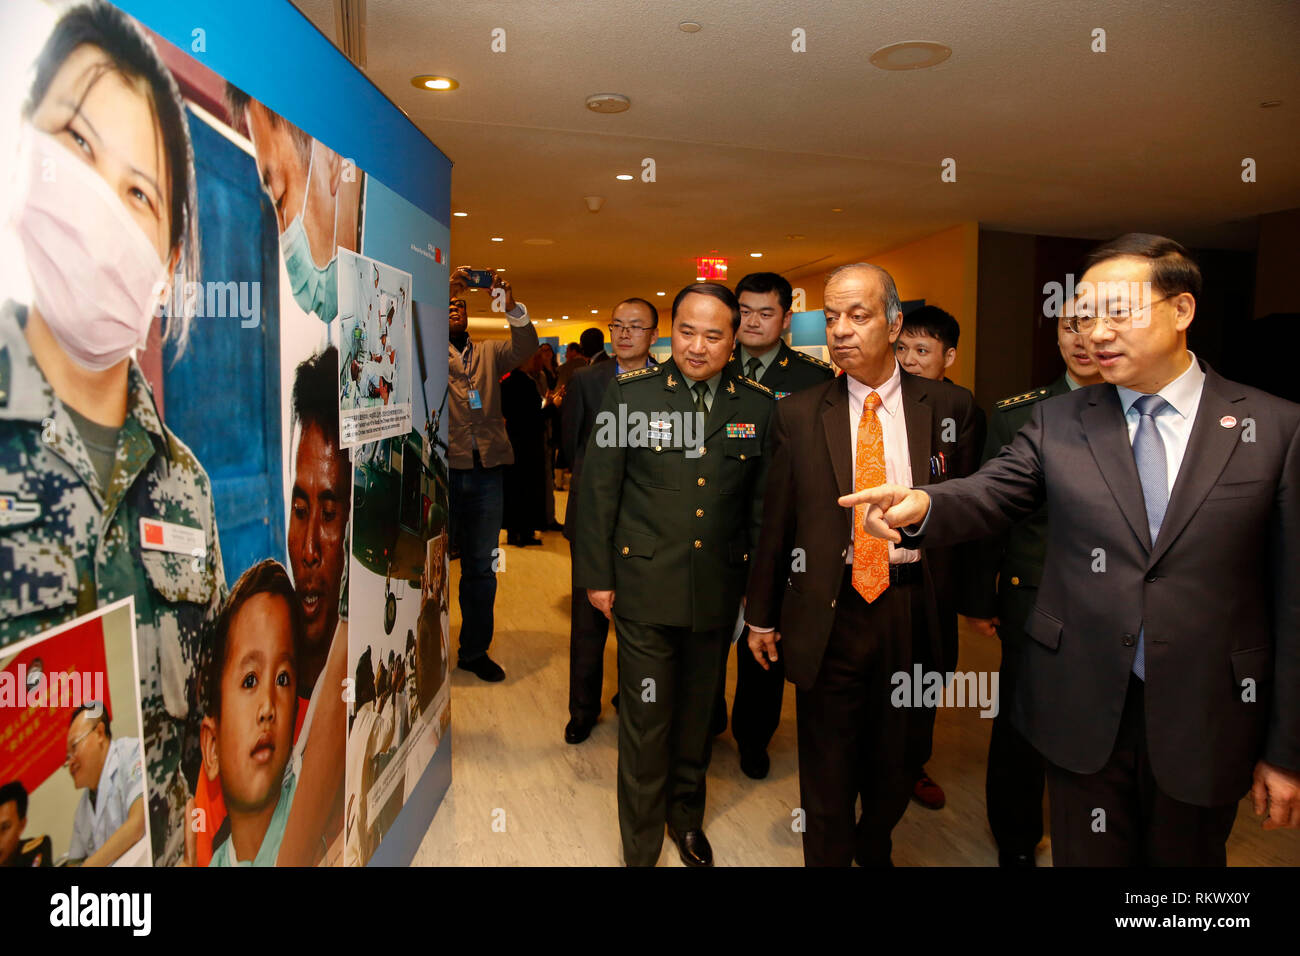 (190213) -- BEIJING, Feb. 13, 2019 (Xinhua) -- (R-L) China's Permanent Representative to the United Nations Ma Zhaoxu, UN Under-Secretary General for Field Support Atul Khare and head of the Chinese People's Liberation Army (PLA) delegation for international communication Mao Naiguo visit an exhibition on China's peacekeeping input at the UN headquarters in New York Feb. 11, 2019. With the theme "CPLA: A Force for World Peace," the exhibition displayed four sections of pictures, featuring Chinese military's participation in UN peacekeeping missions, securing maritime passages, disaster relief Stock Photo